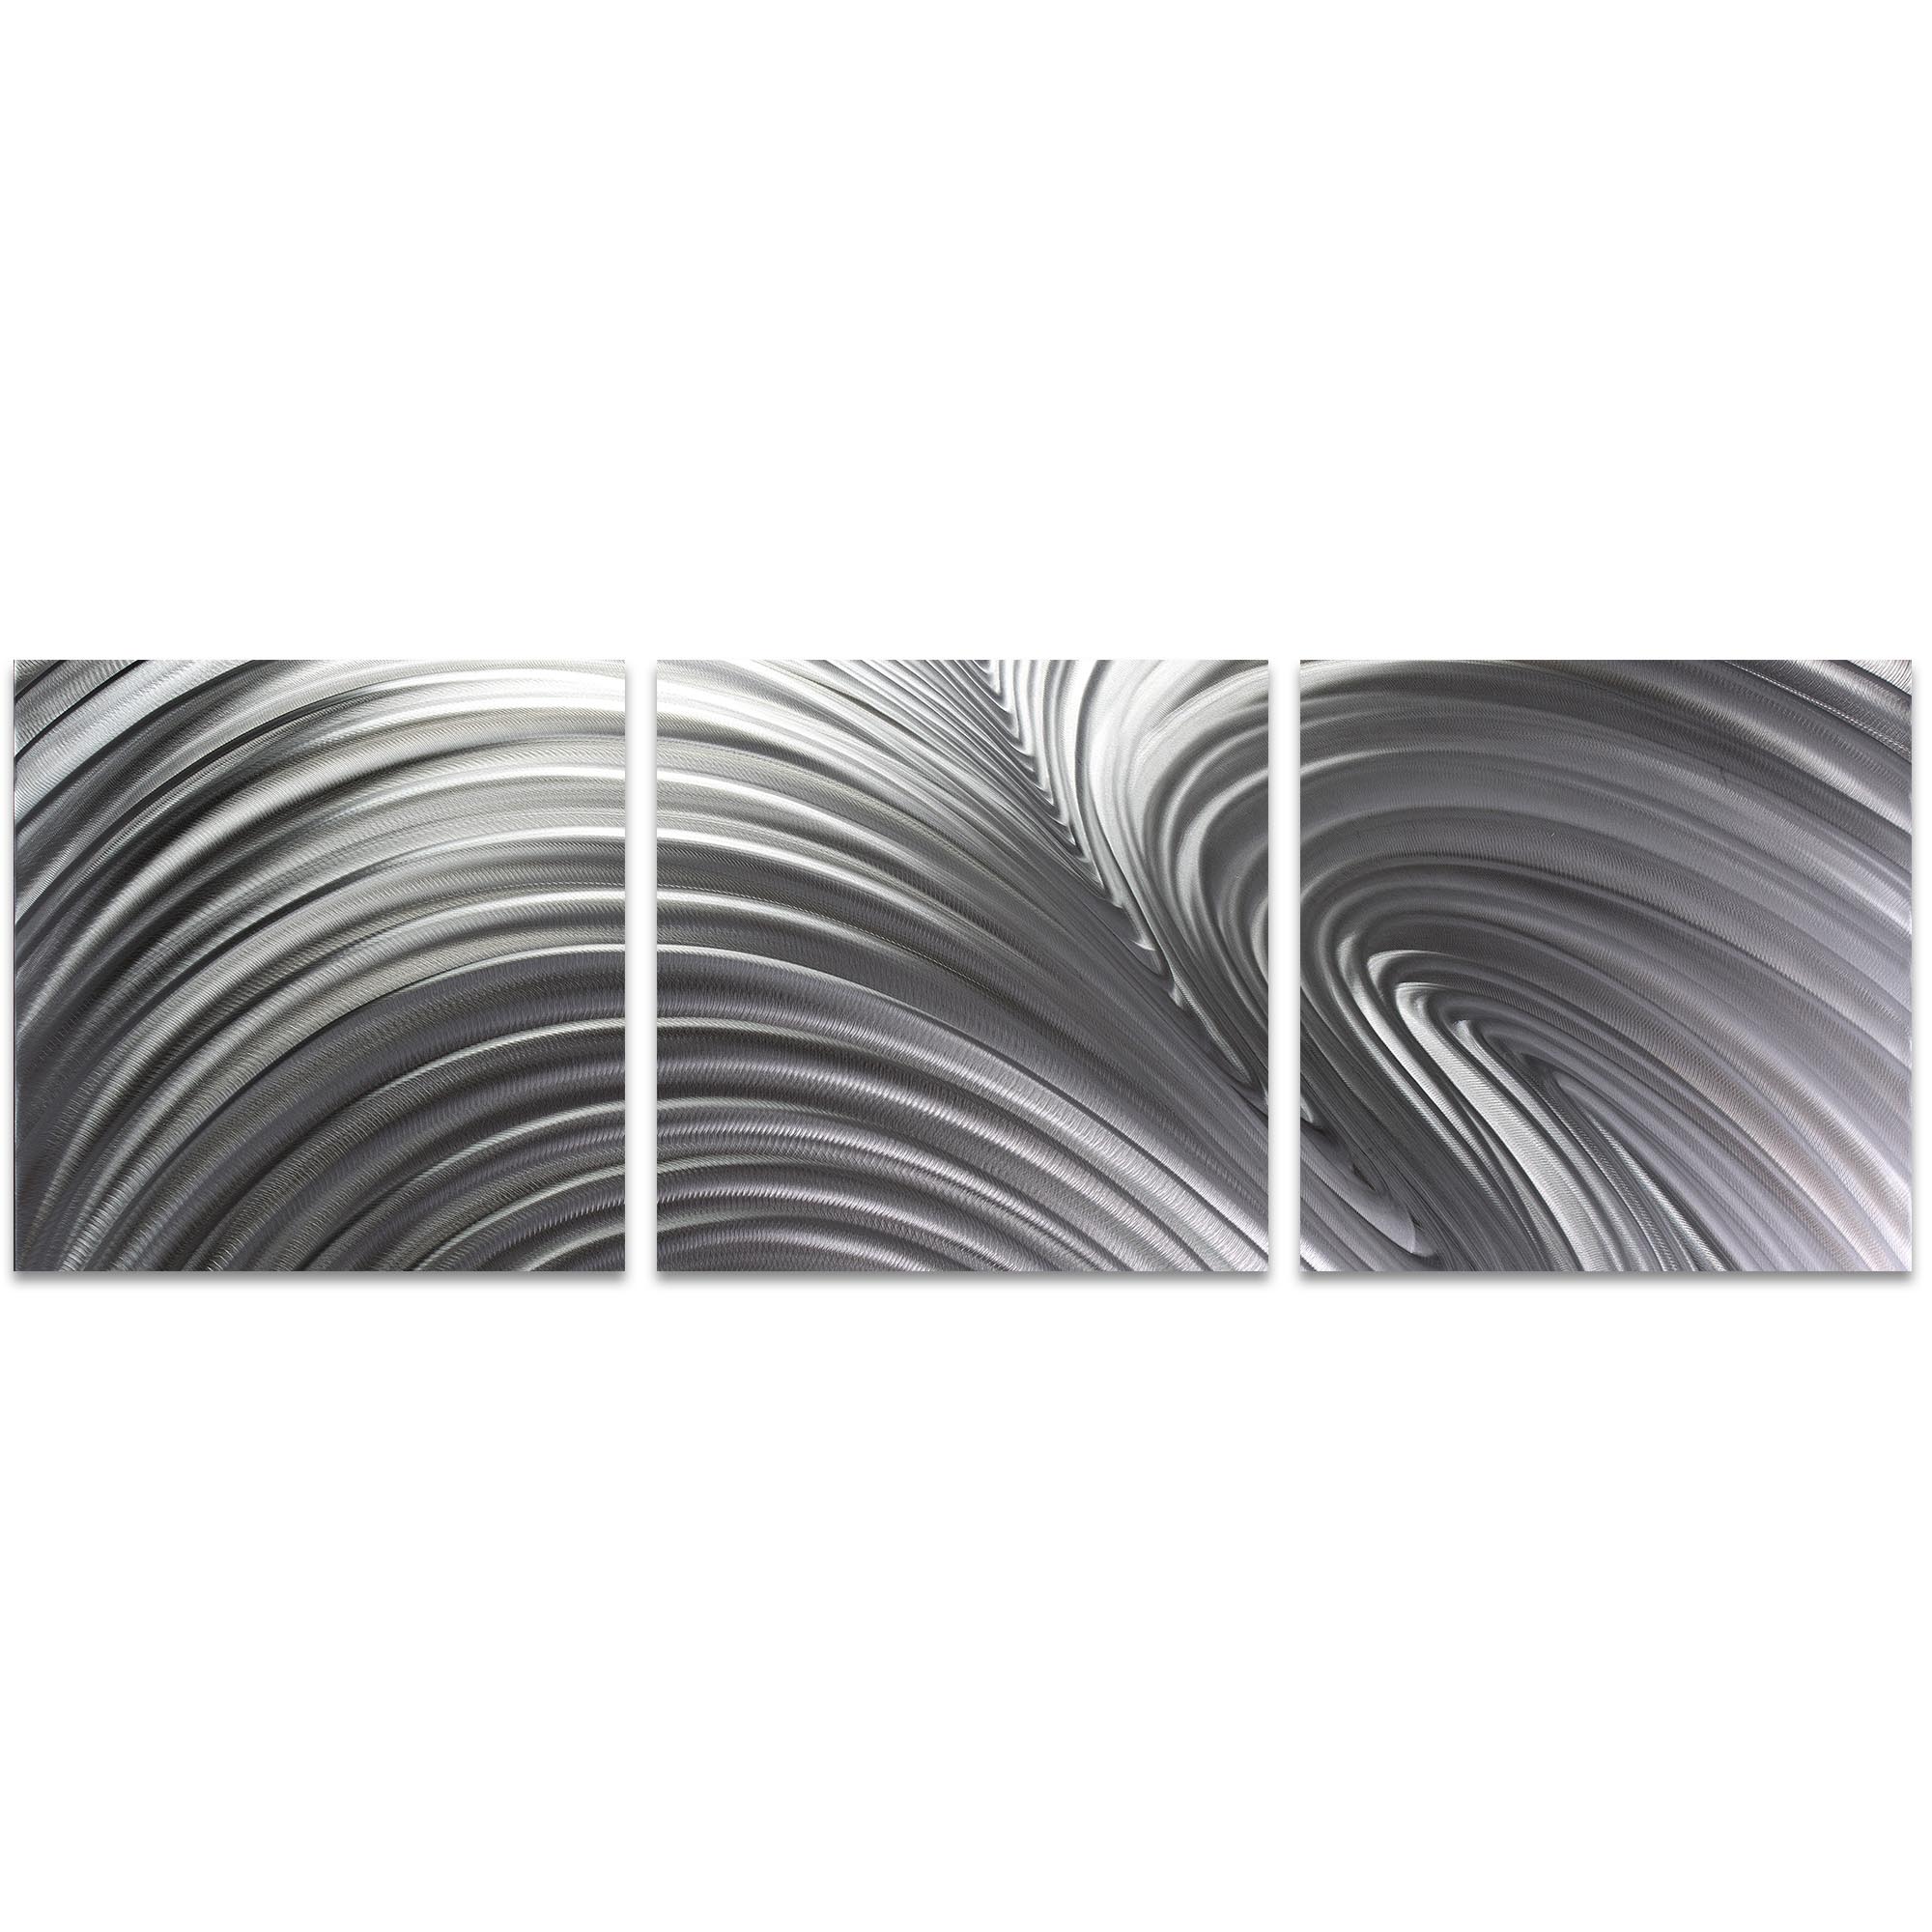 Fusion Triptych Large 70x22in. Metal or Acrylic Contemporary Decor